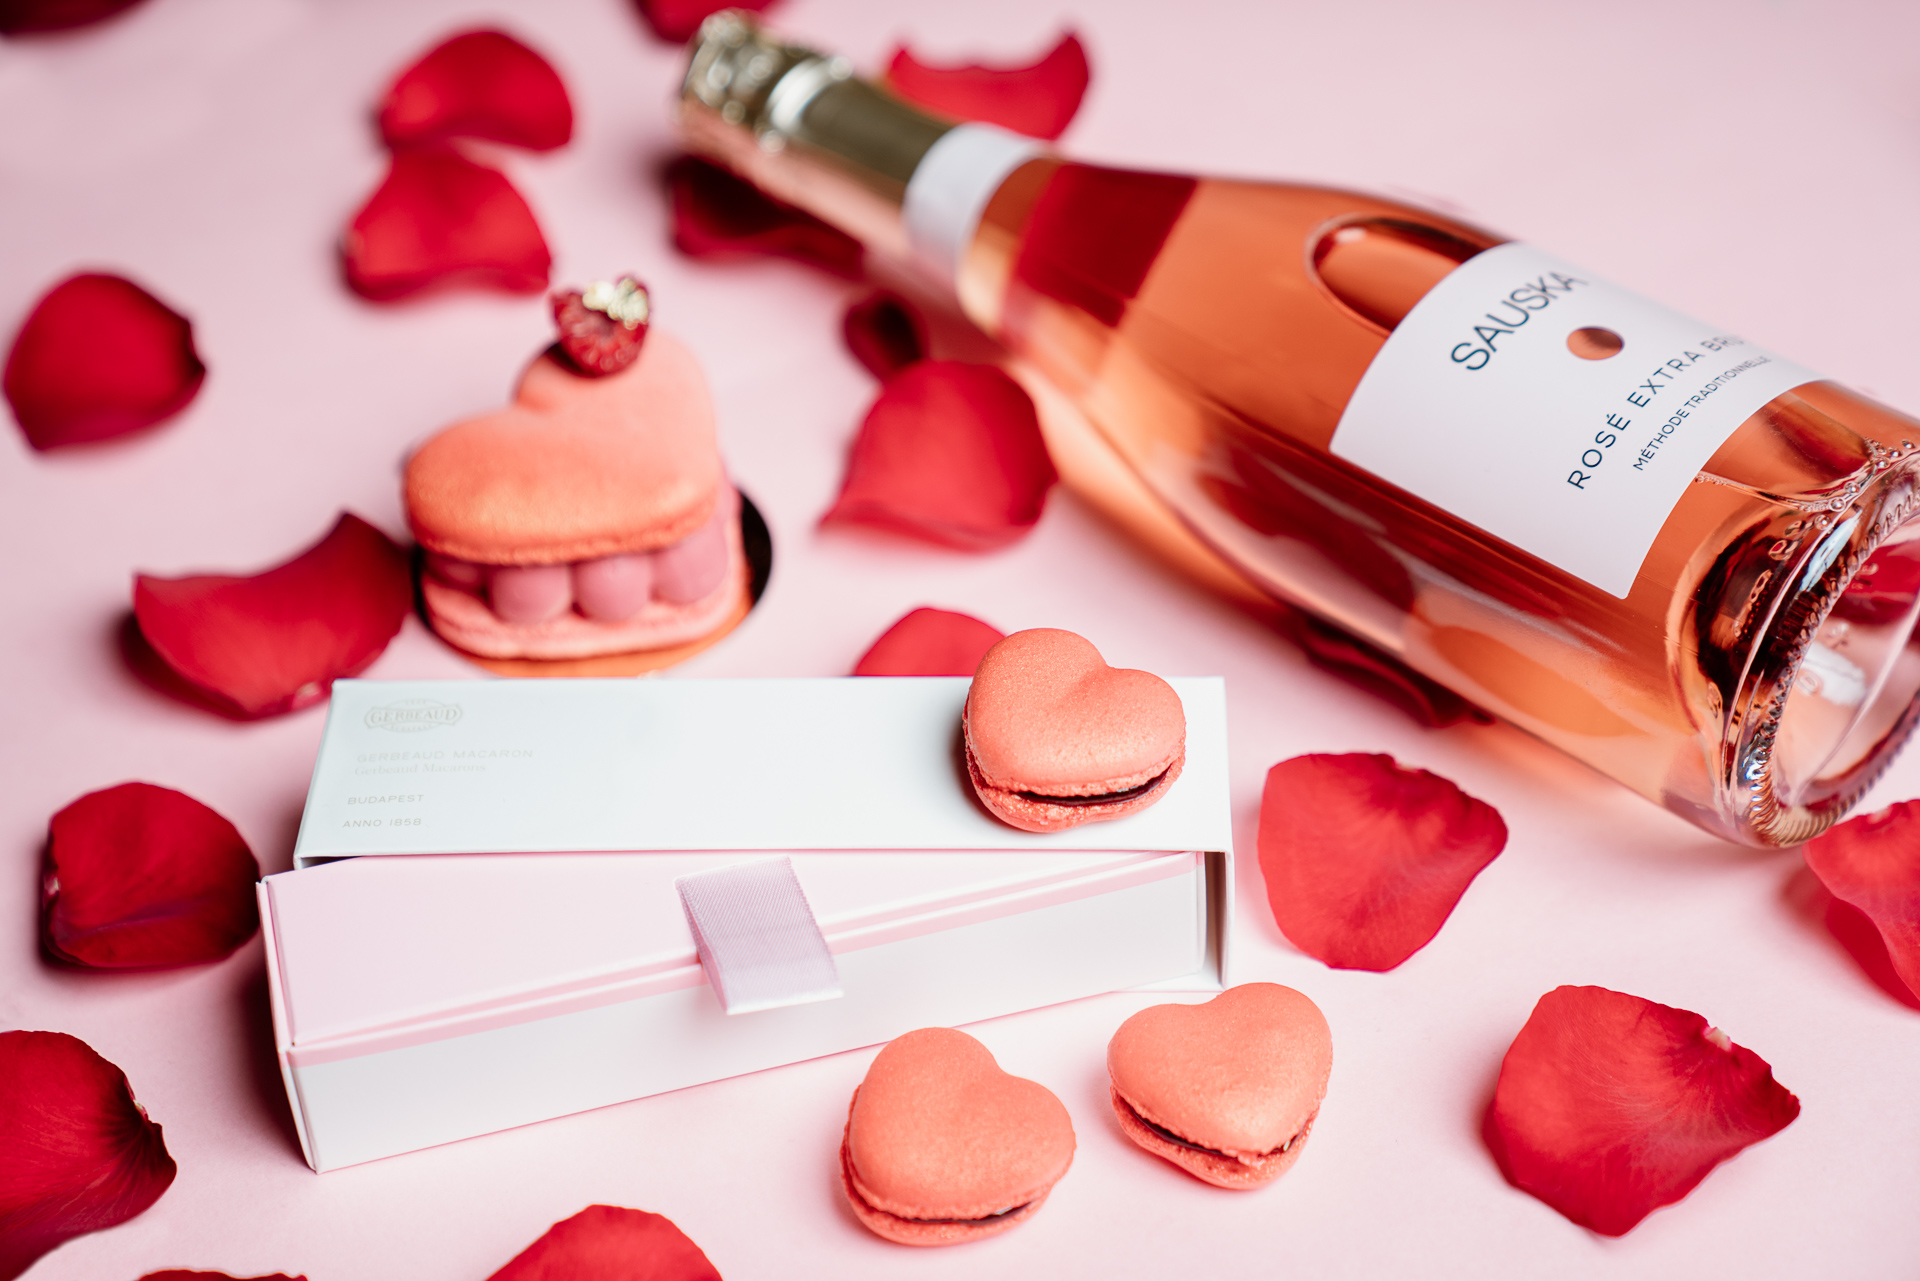 Gerbeaud's Valentine's Day offer include the Raspberry macaron dessert with one glass of Sauska sparkling wine and heart-shaped, jam-filled macaron in package